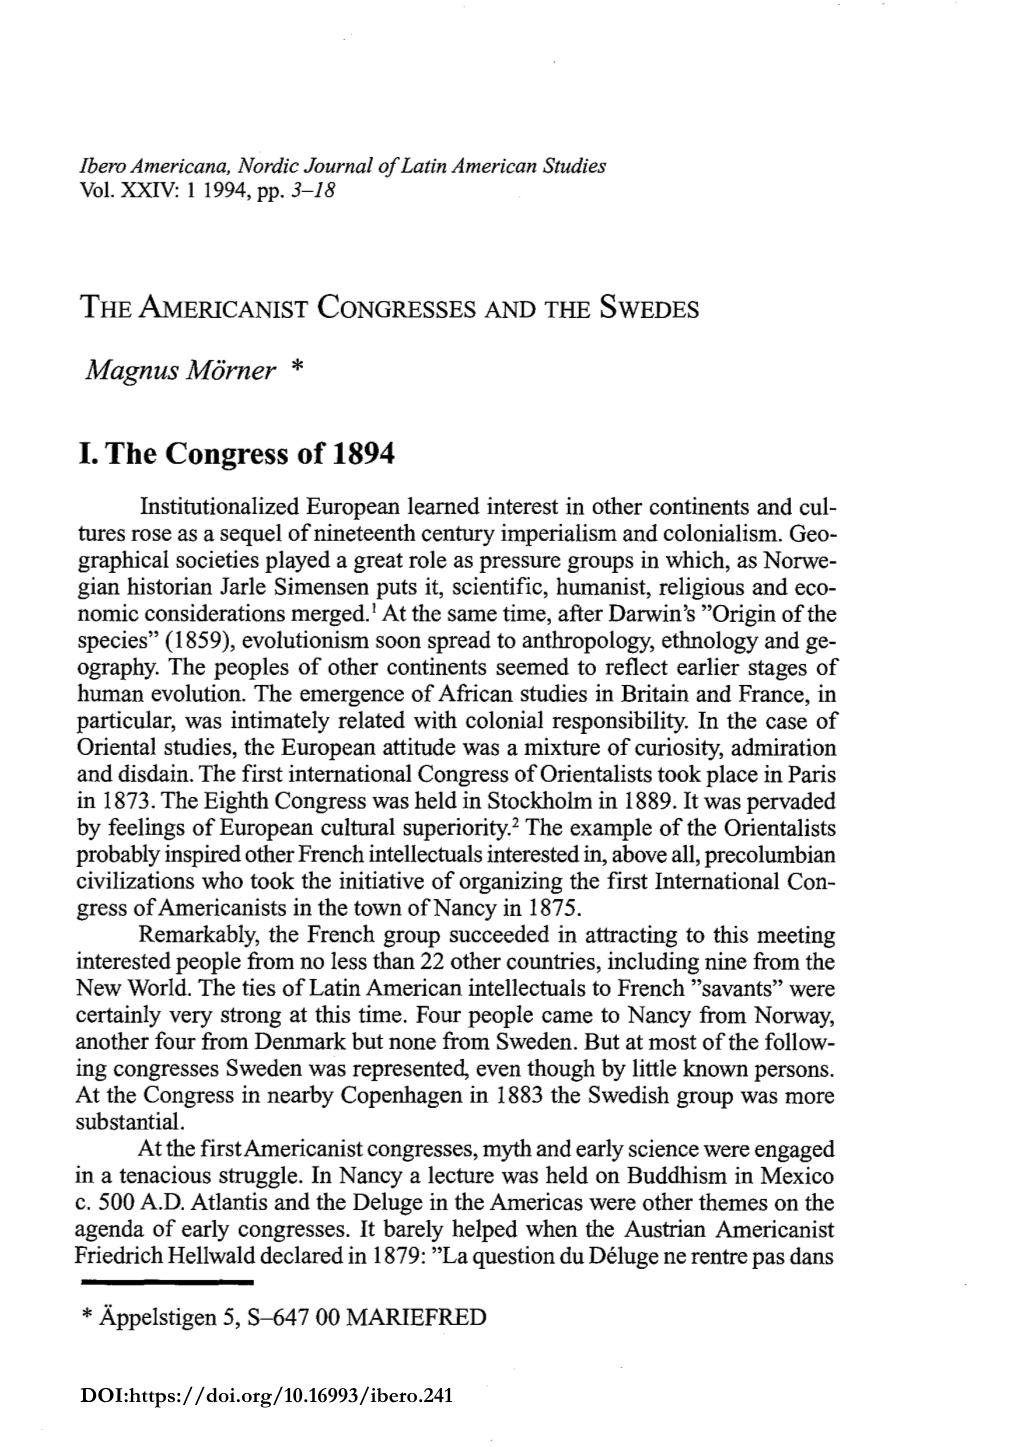 I. the Congress of 1894